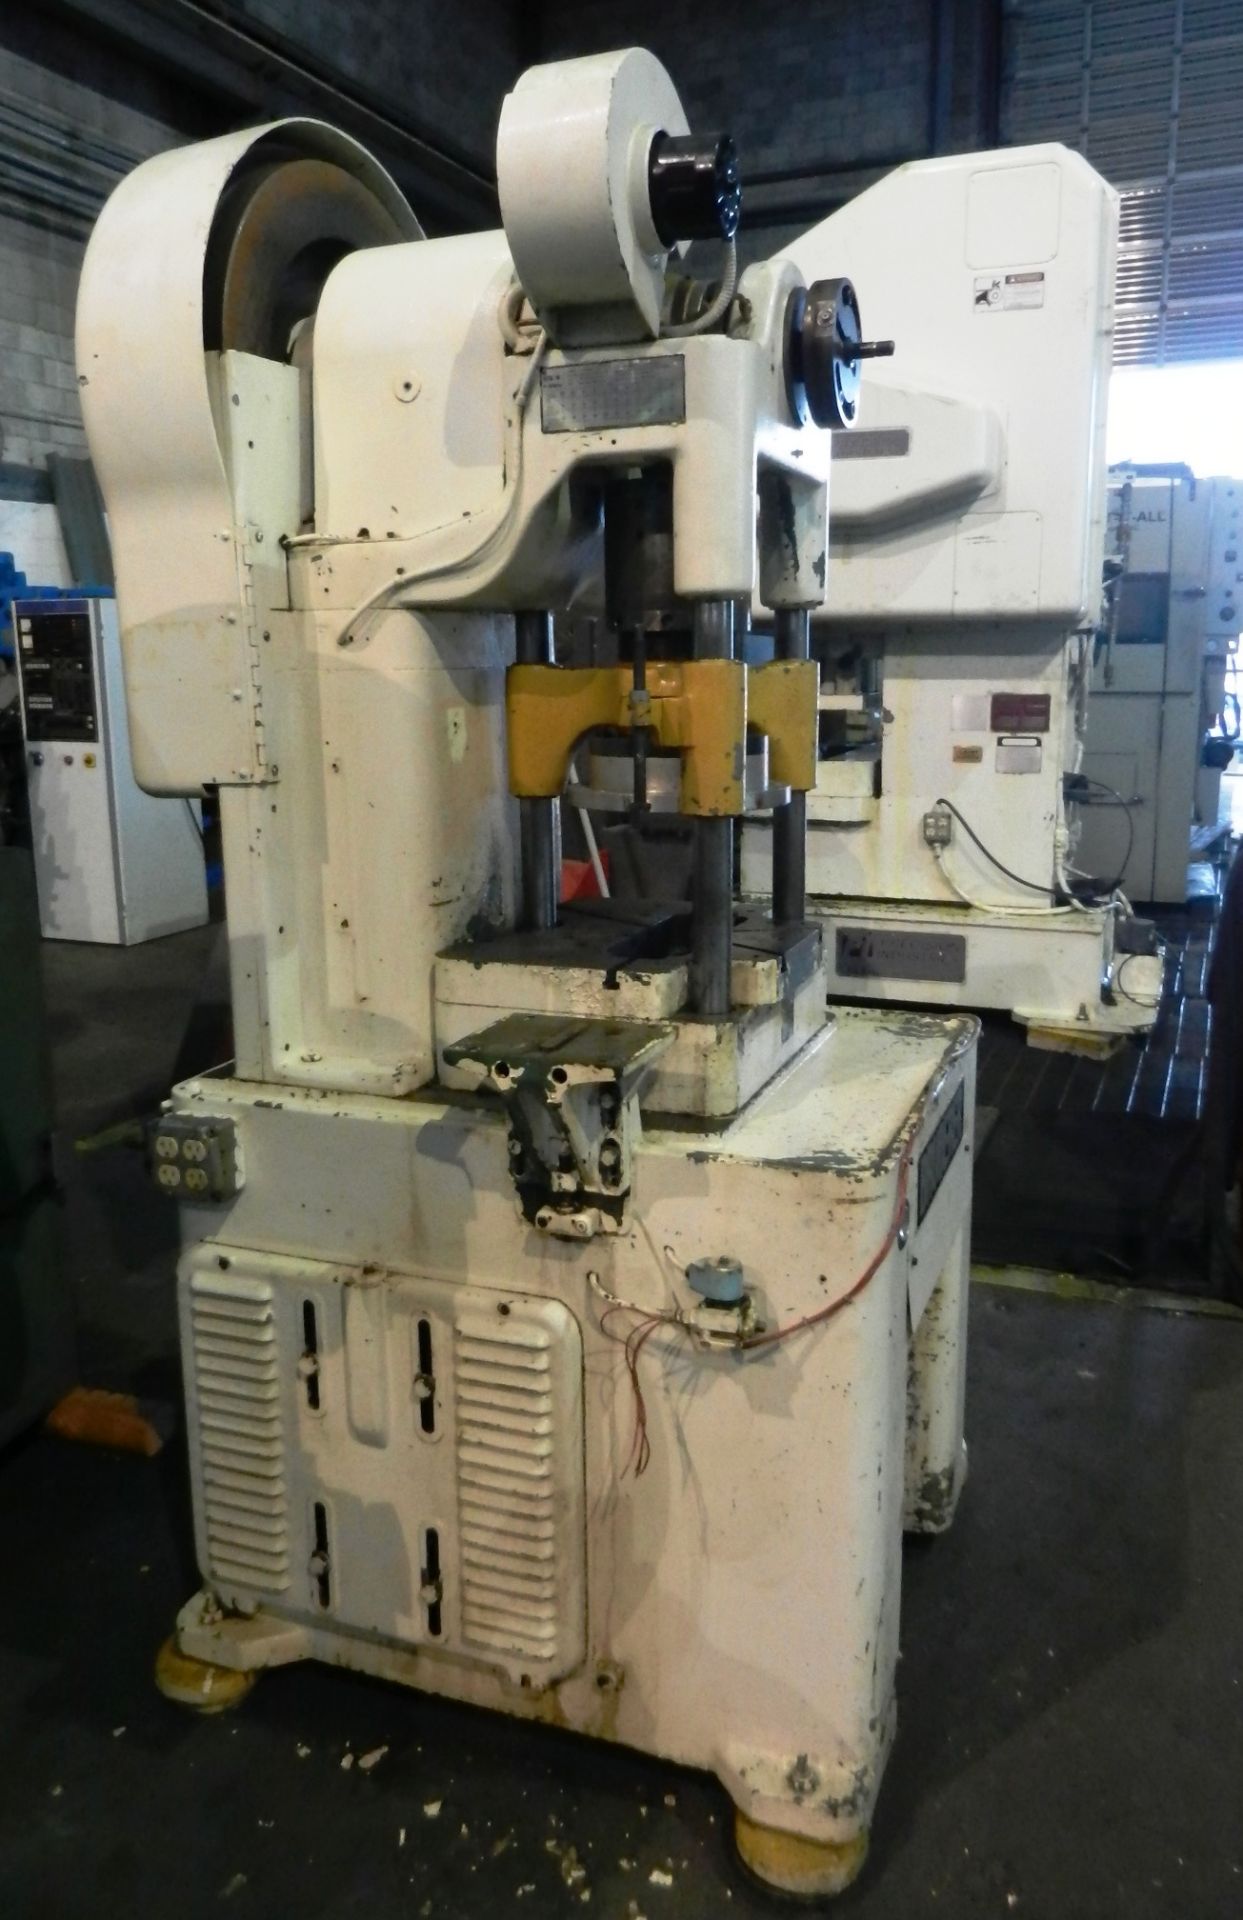 BRUDERER MODEL BSTA-30 PRECISION HIGH SPEED POWER PUNCH PRESS S/N 3293 / 2816 / 2598 - Image 2 of 2